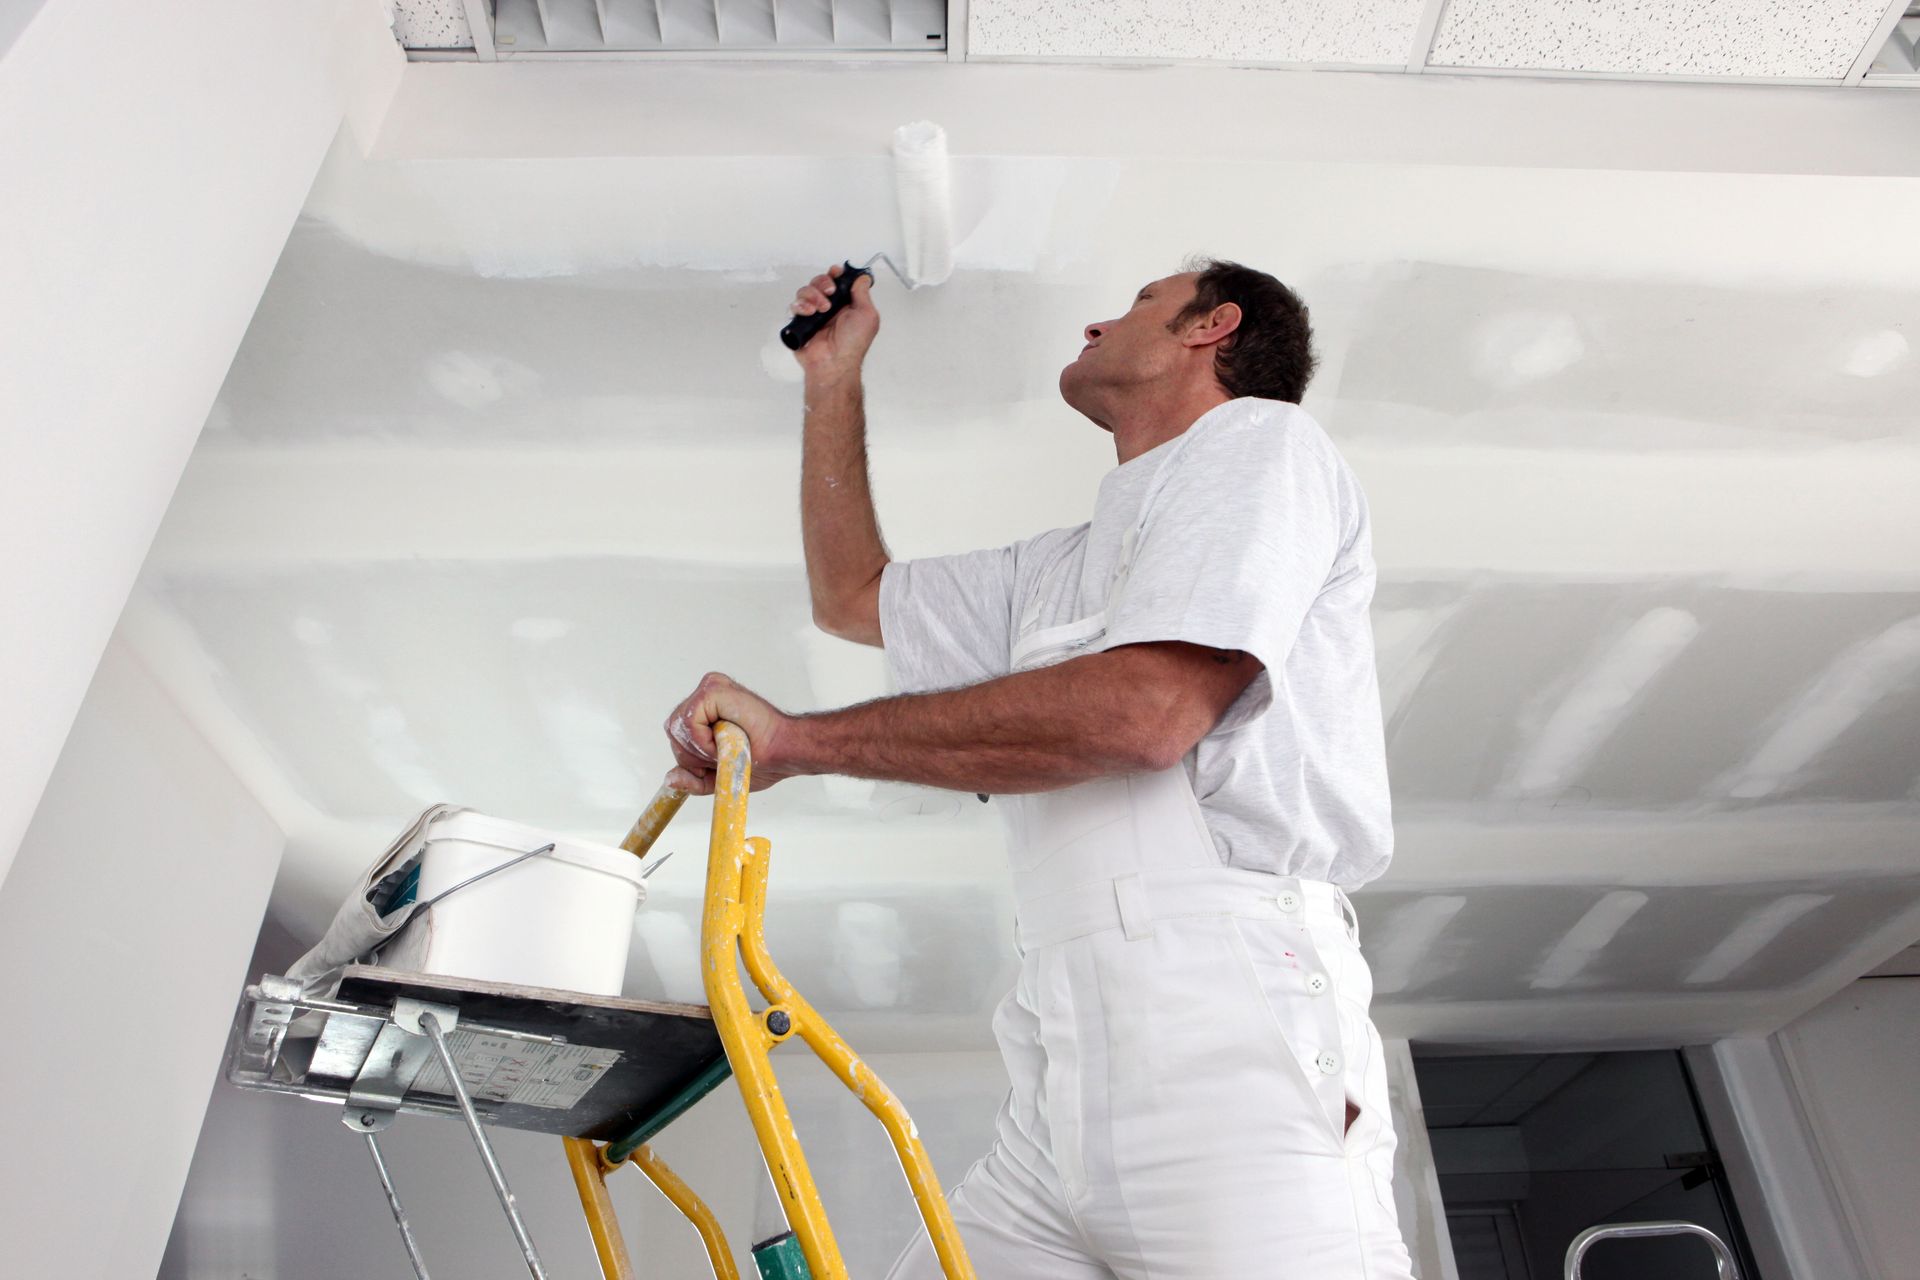 Skilled painter meticulously painting a ceiling with a brush, ensuring a smooth and even finish.